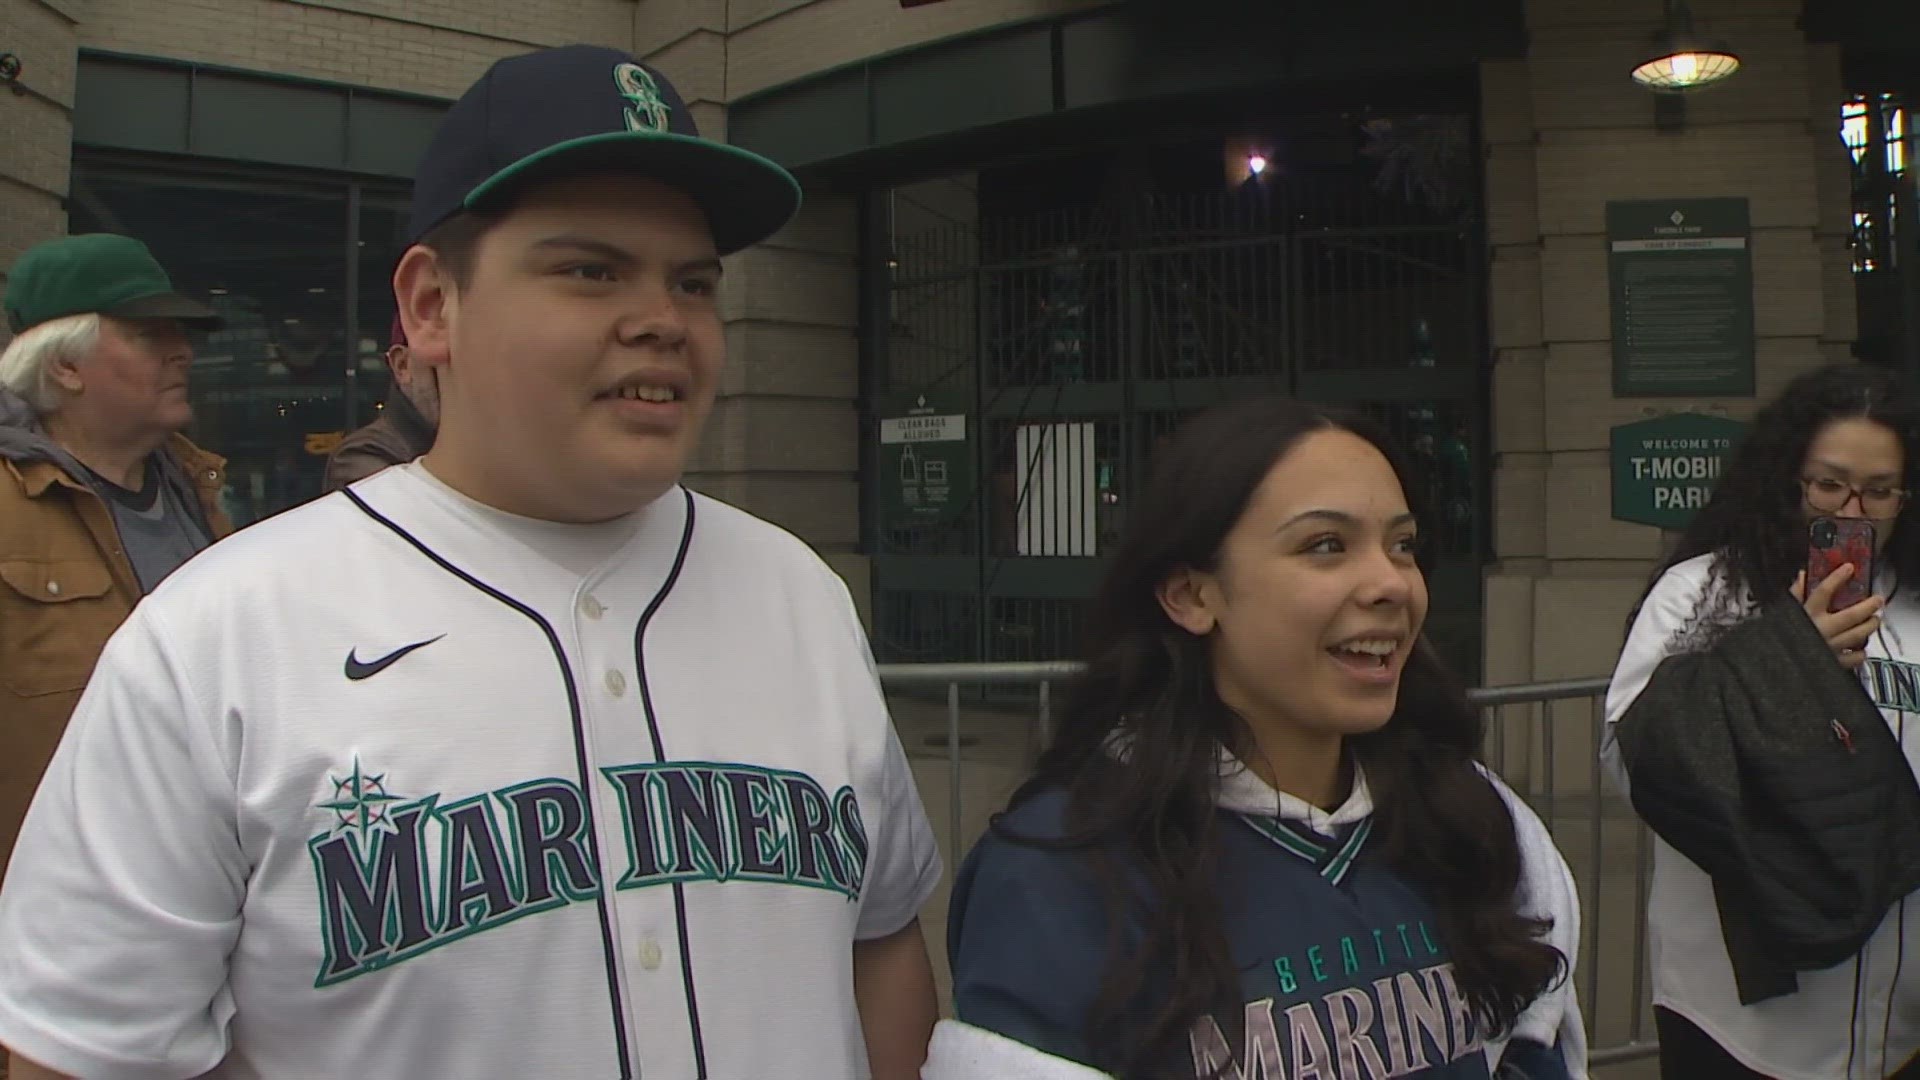 Unfortunately, the Mariners fell short to the Boston Red Sox, but fans remain excited for what the season holds.